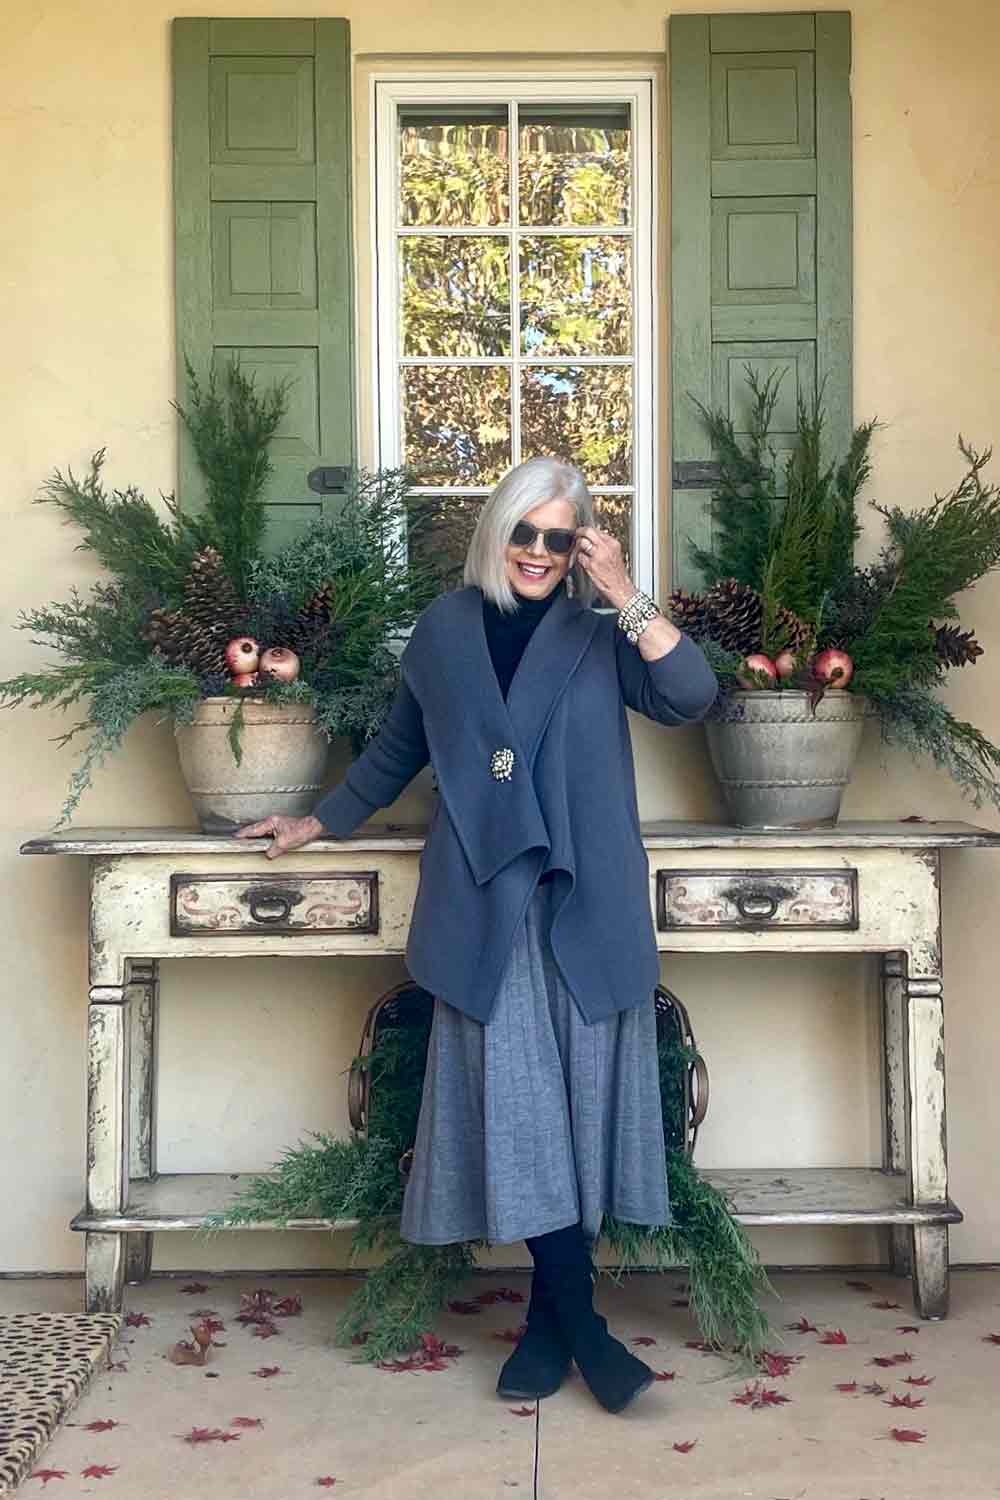 Designer Cindy Hattersley in a Margaret O'Leary cardigan to which she added a festive brooch for the holidays. #fashionover50 #vintagebrooch